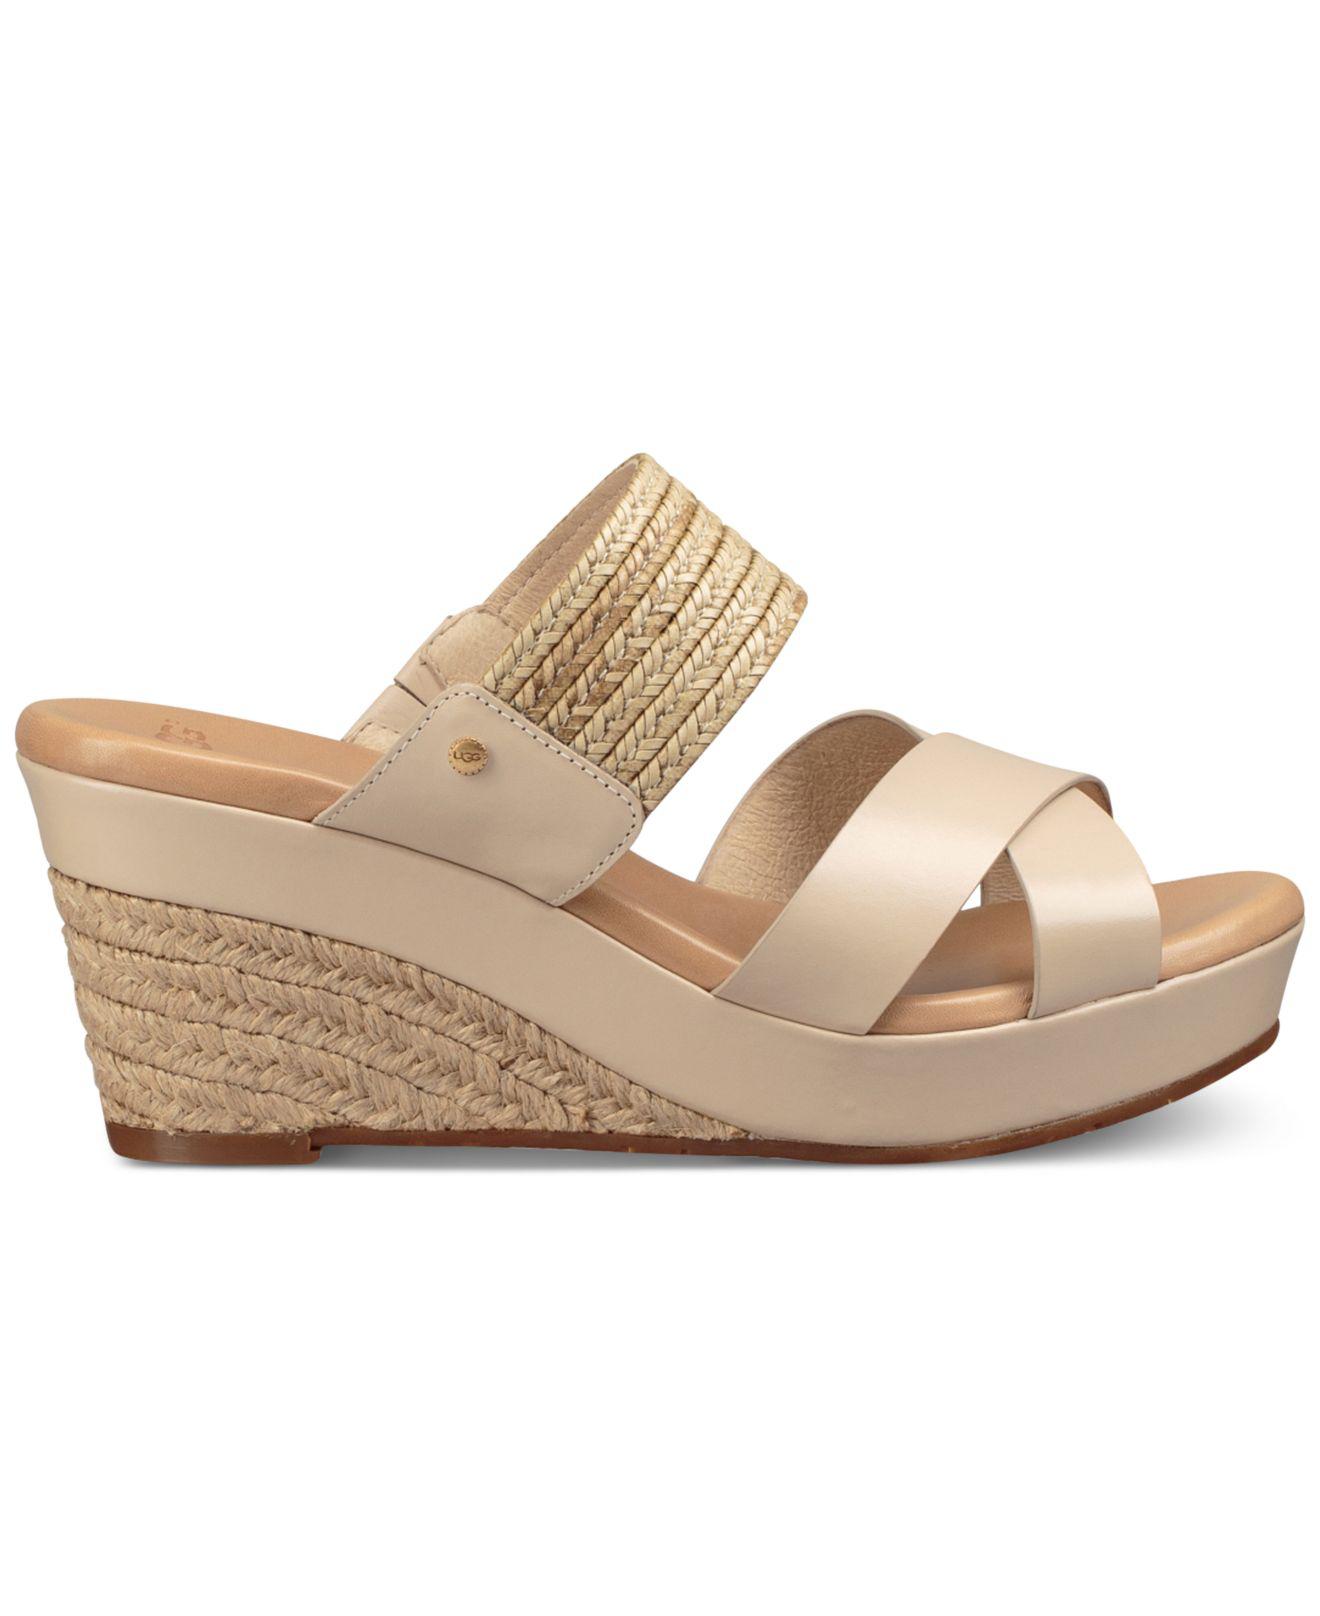 UGG Leather Adriana Wedge Sandals - Lyst